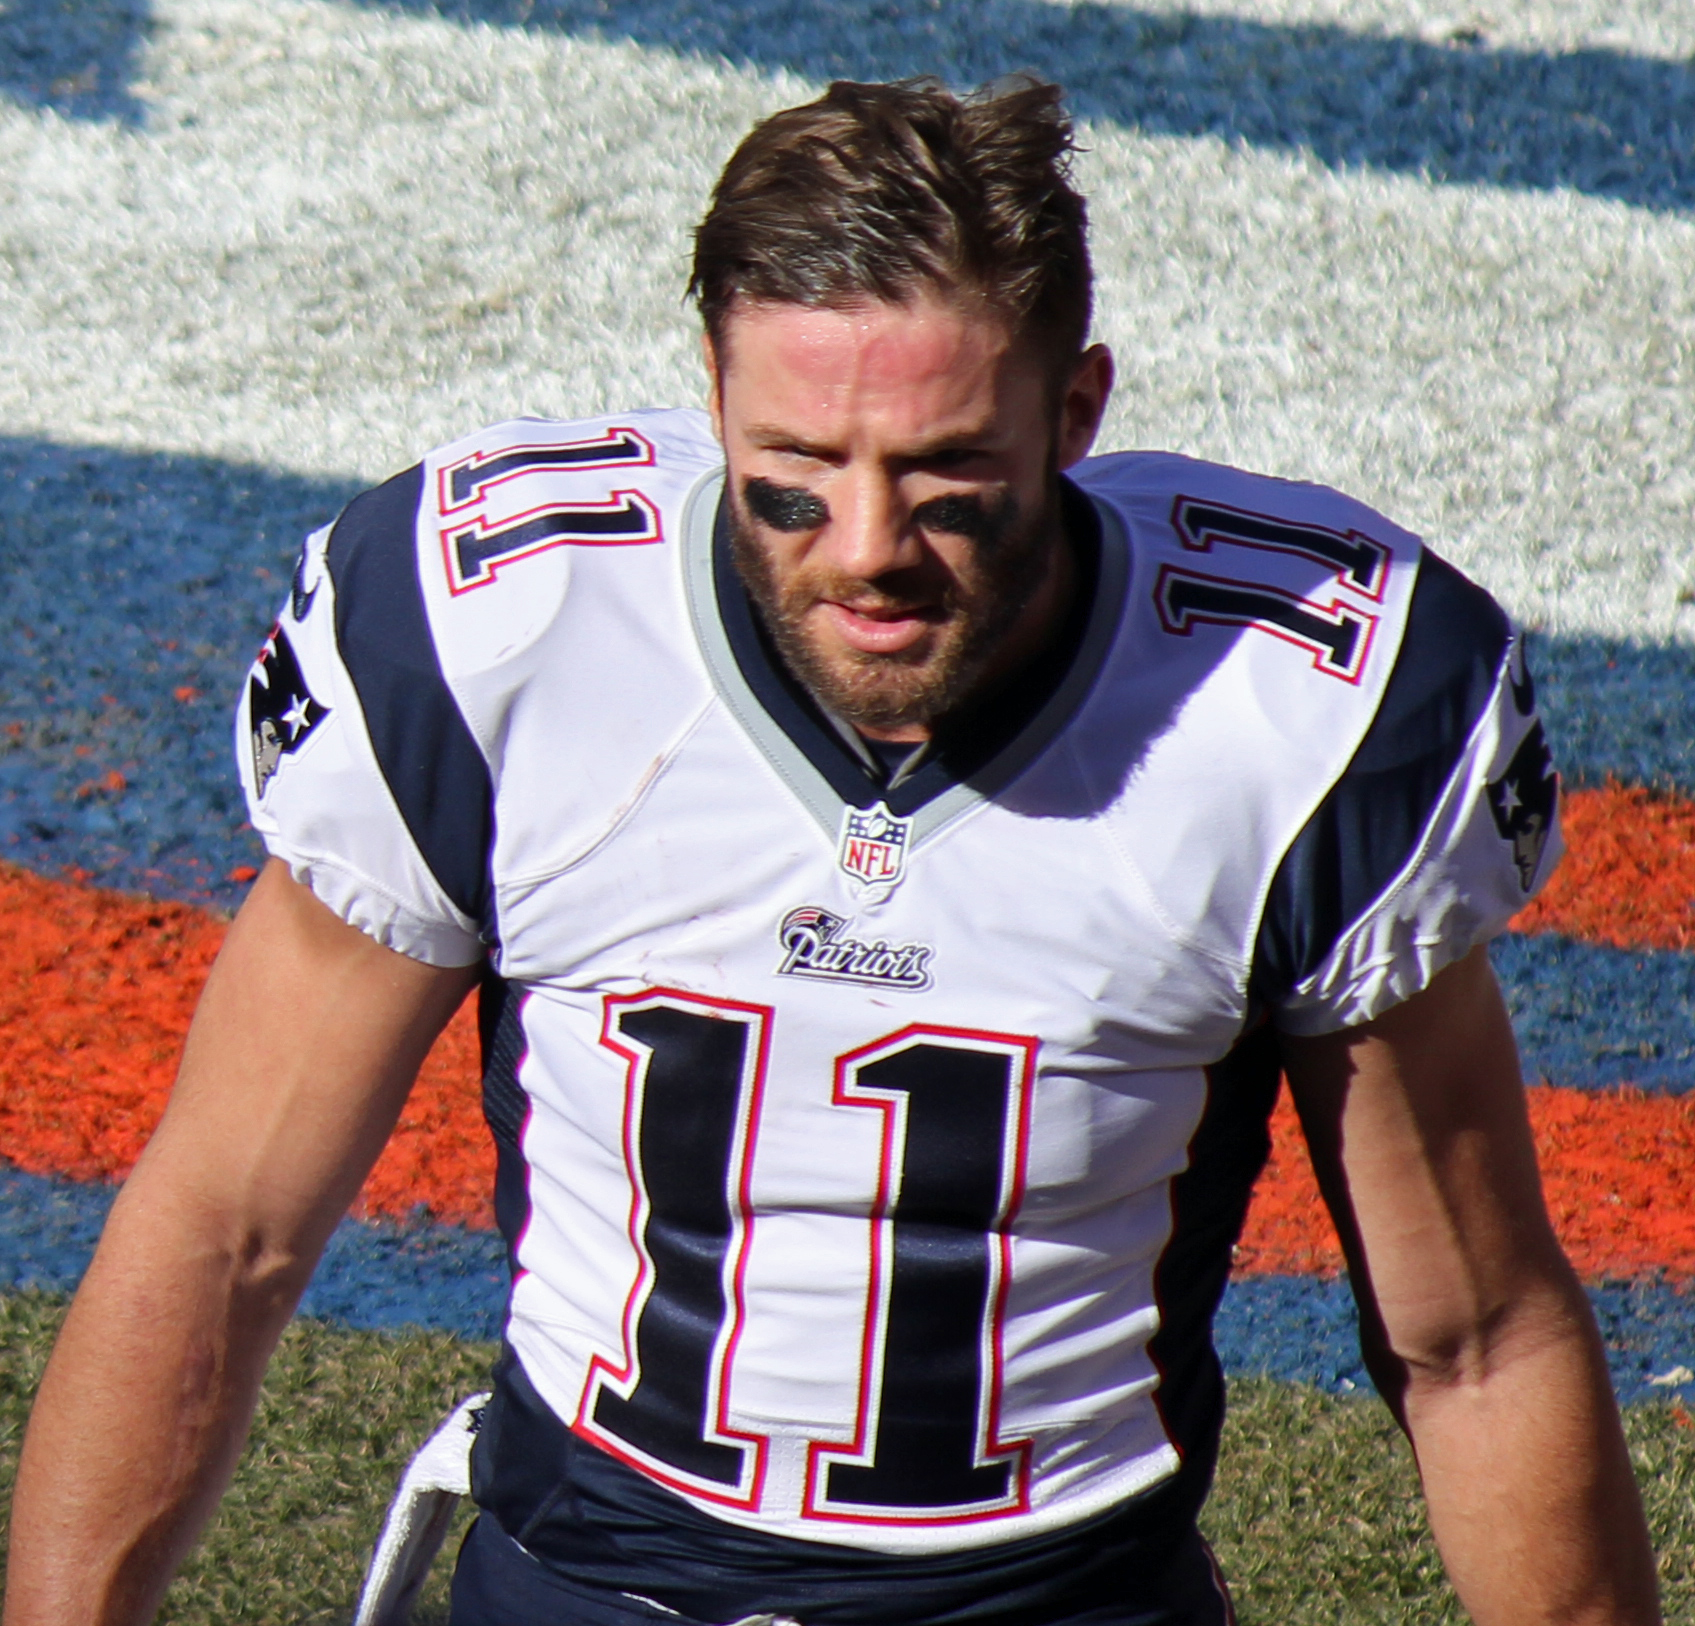 Julian Edelman: Playing for Patriots may have shortened career